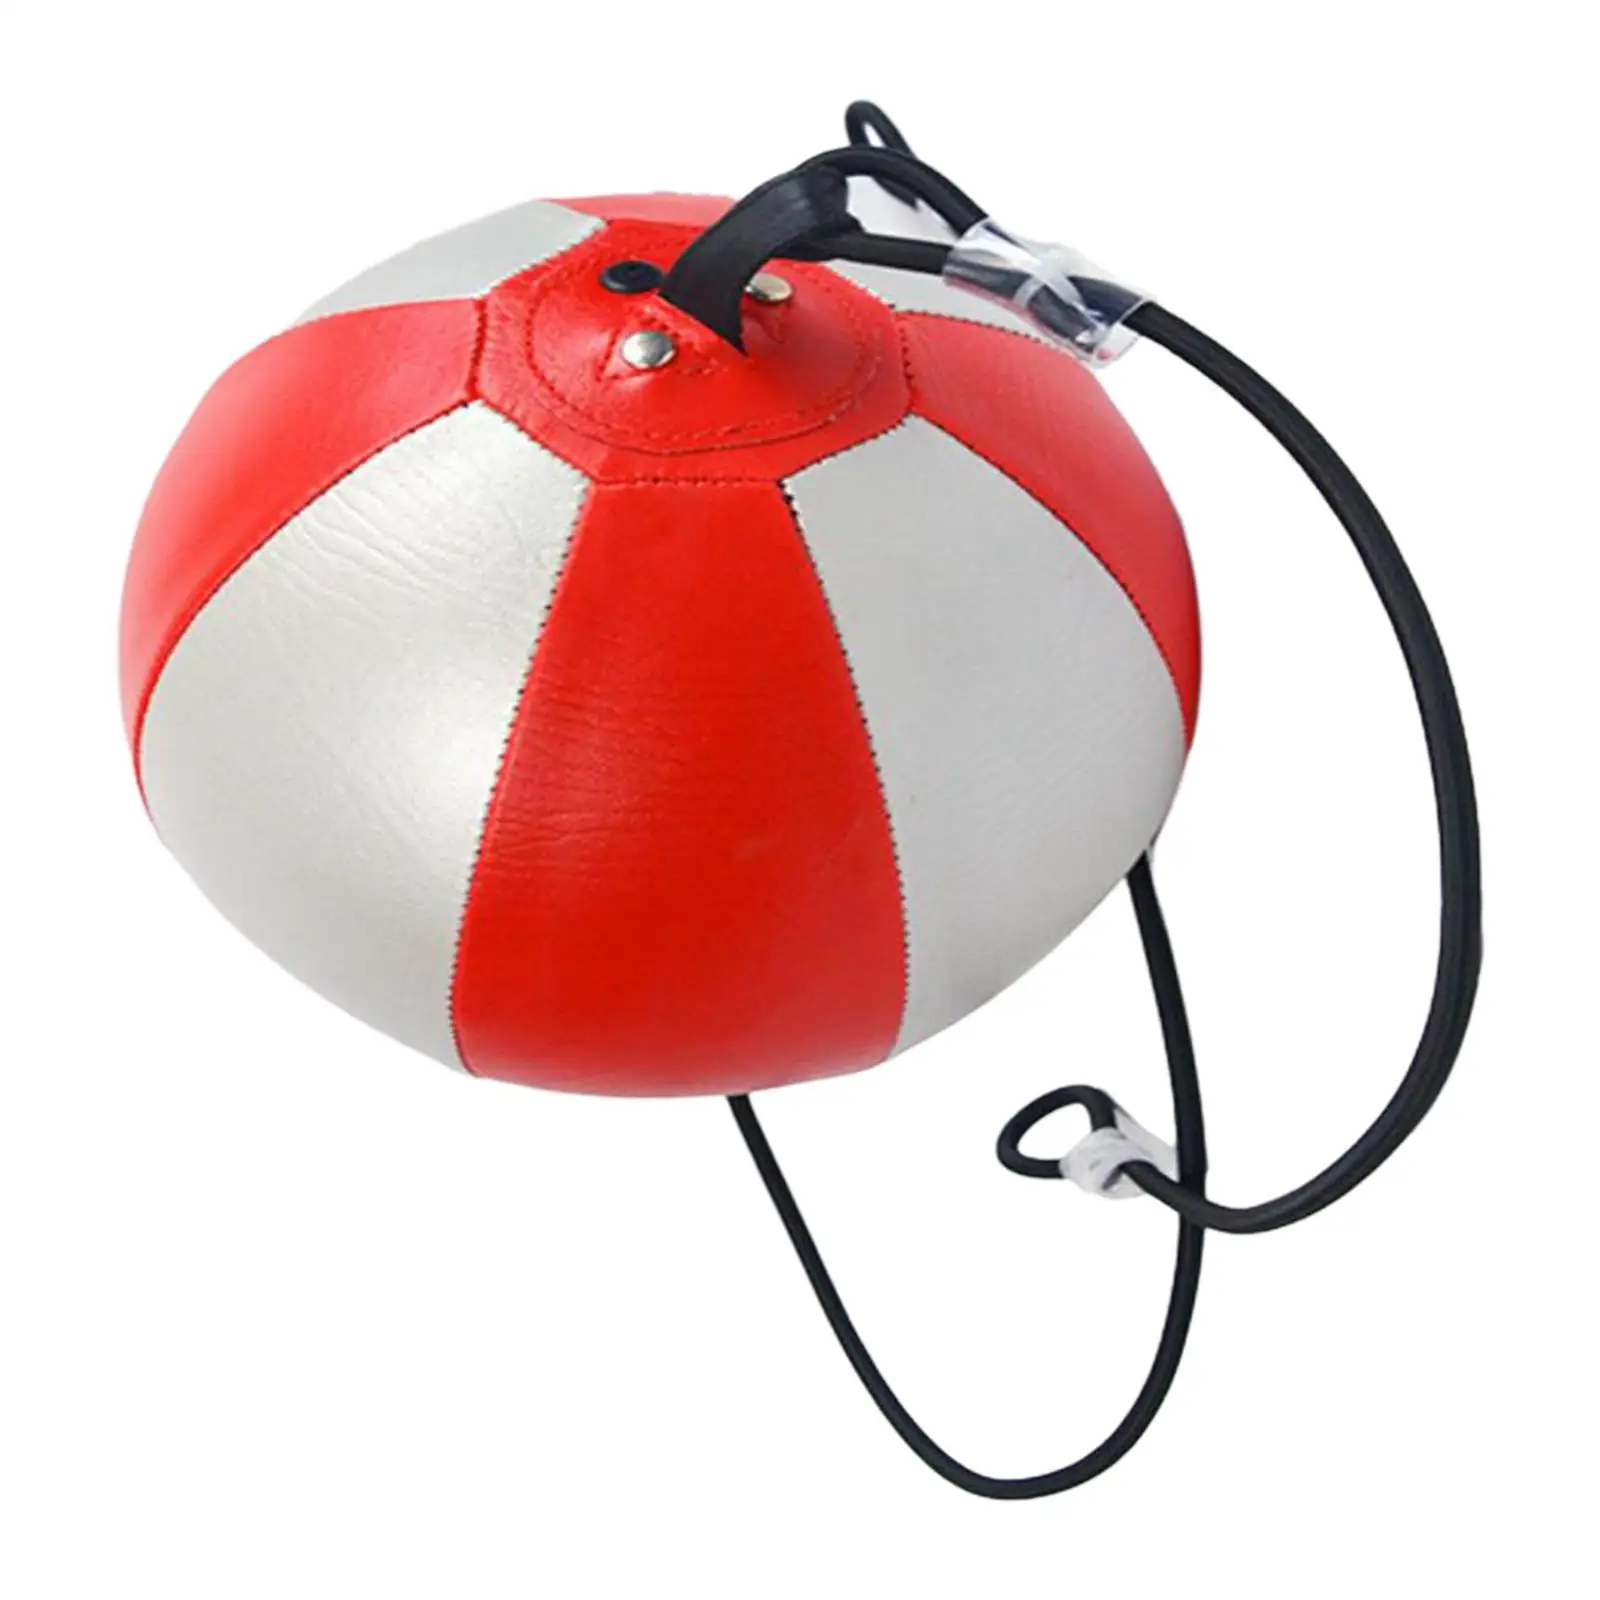 Boxing Speed Ball Reaction Target Fitness Equipment Premium Punching Ball Double End Bag for Exercise, Workout, Training